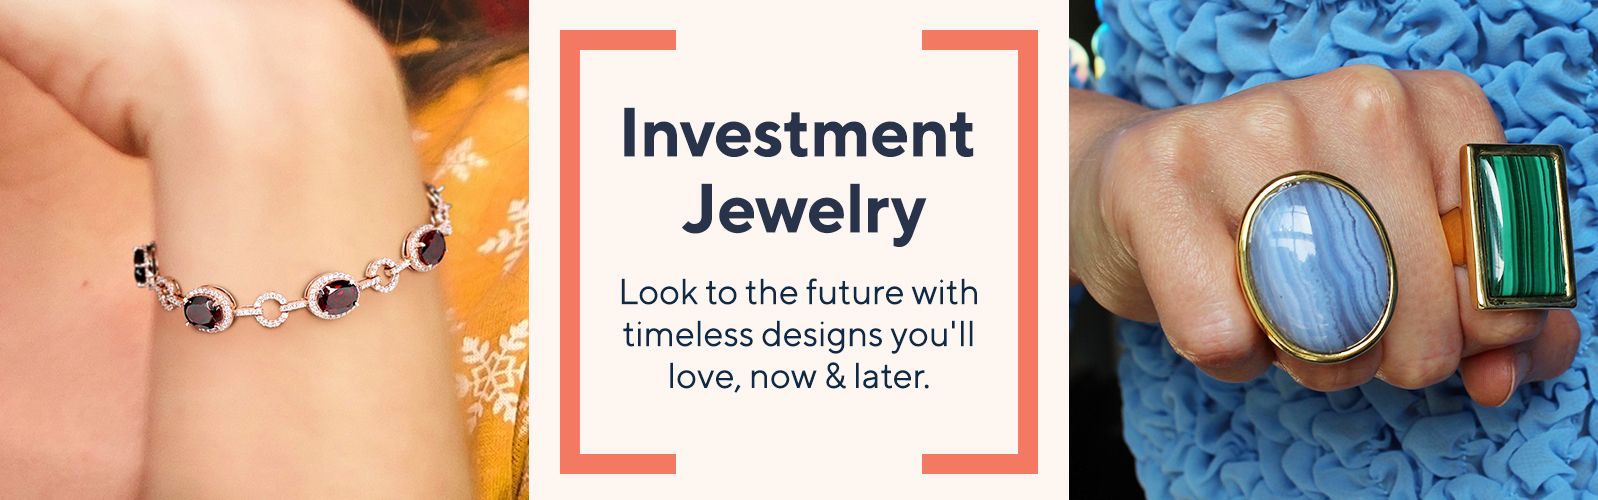 Investment Jewelry - Look to the future with timeless designs you'll love, now & later. 